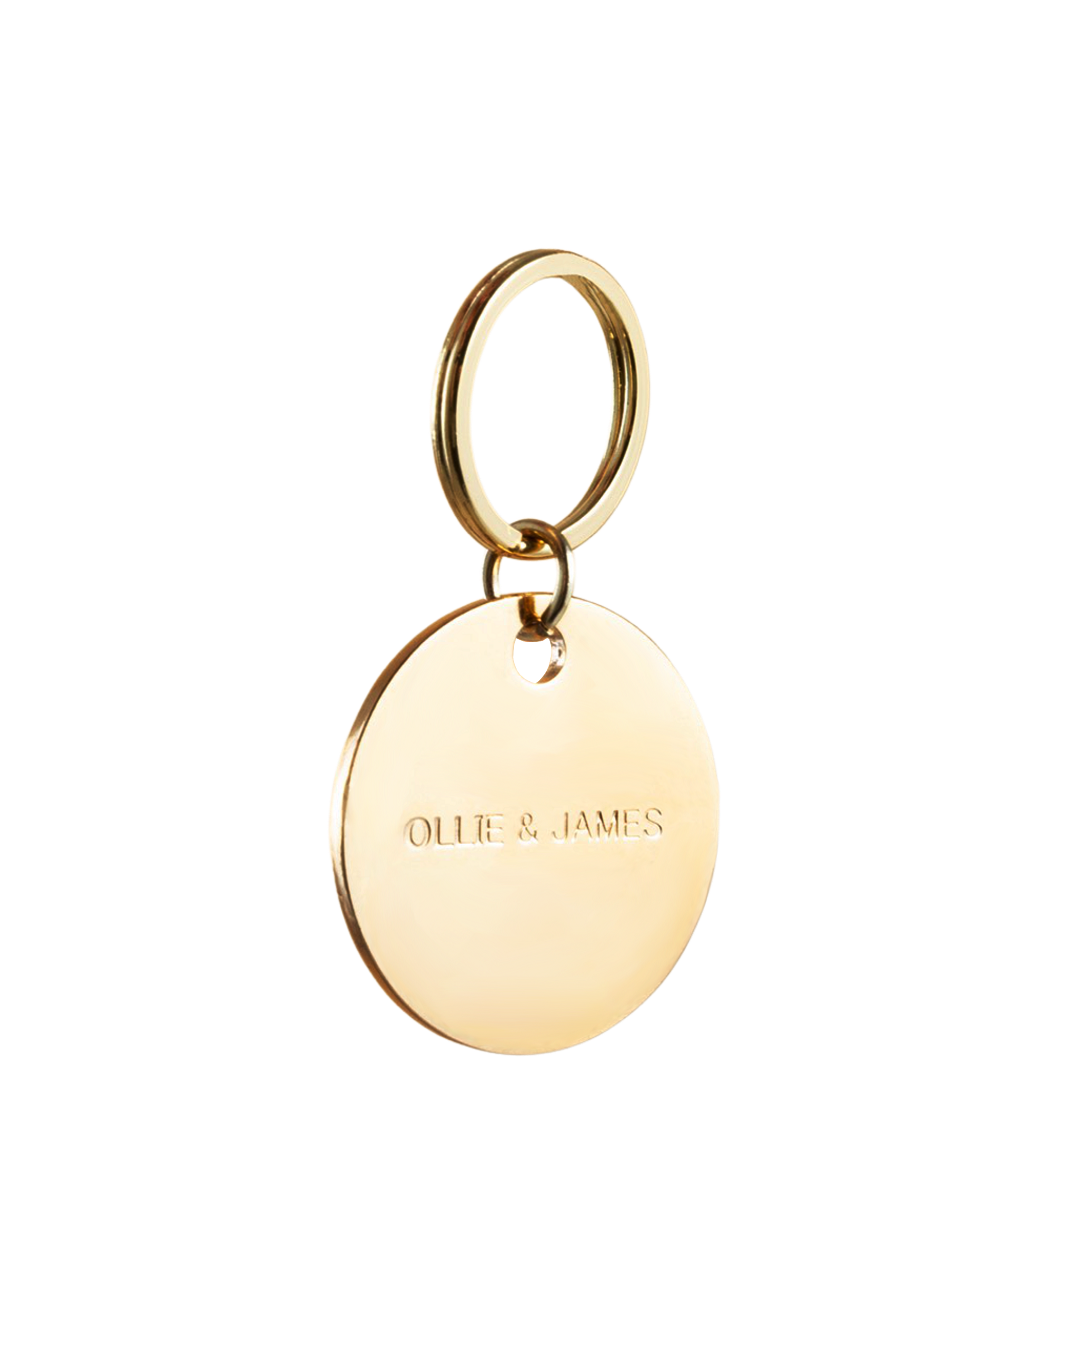 Gold Ollie and James dog ID charm or tag